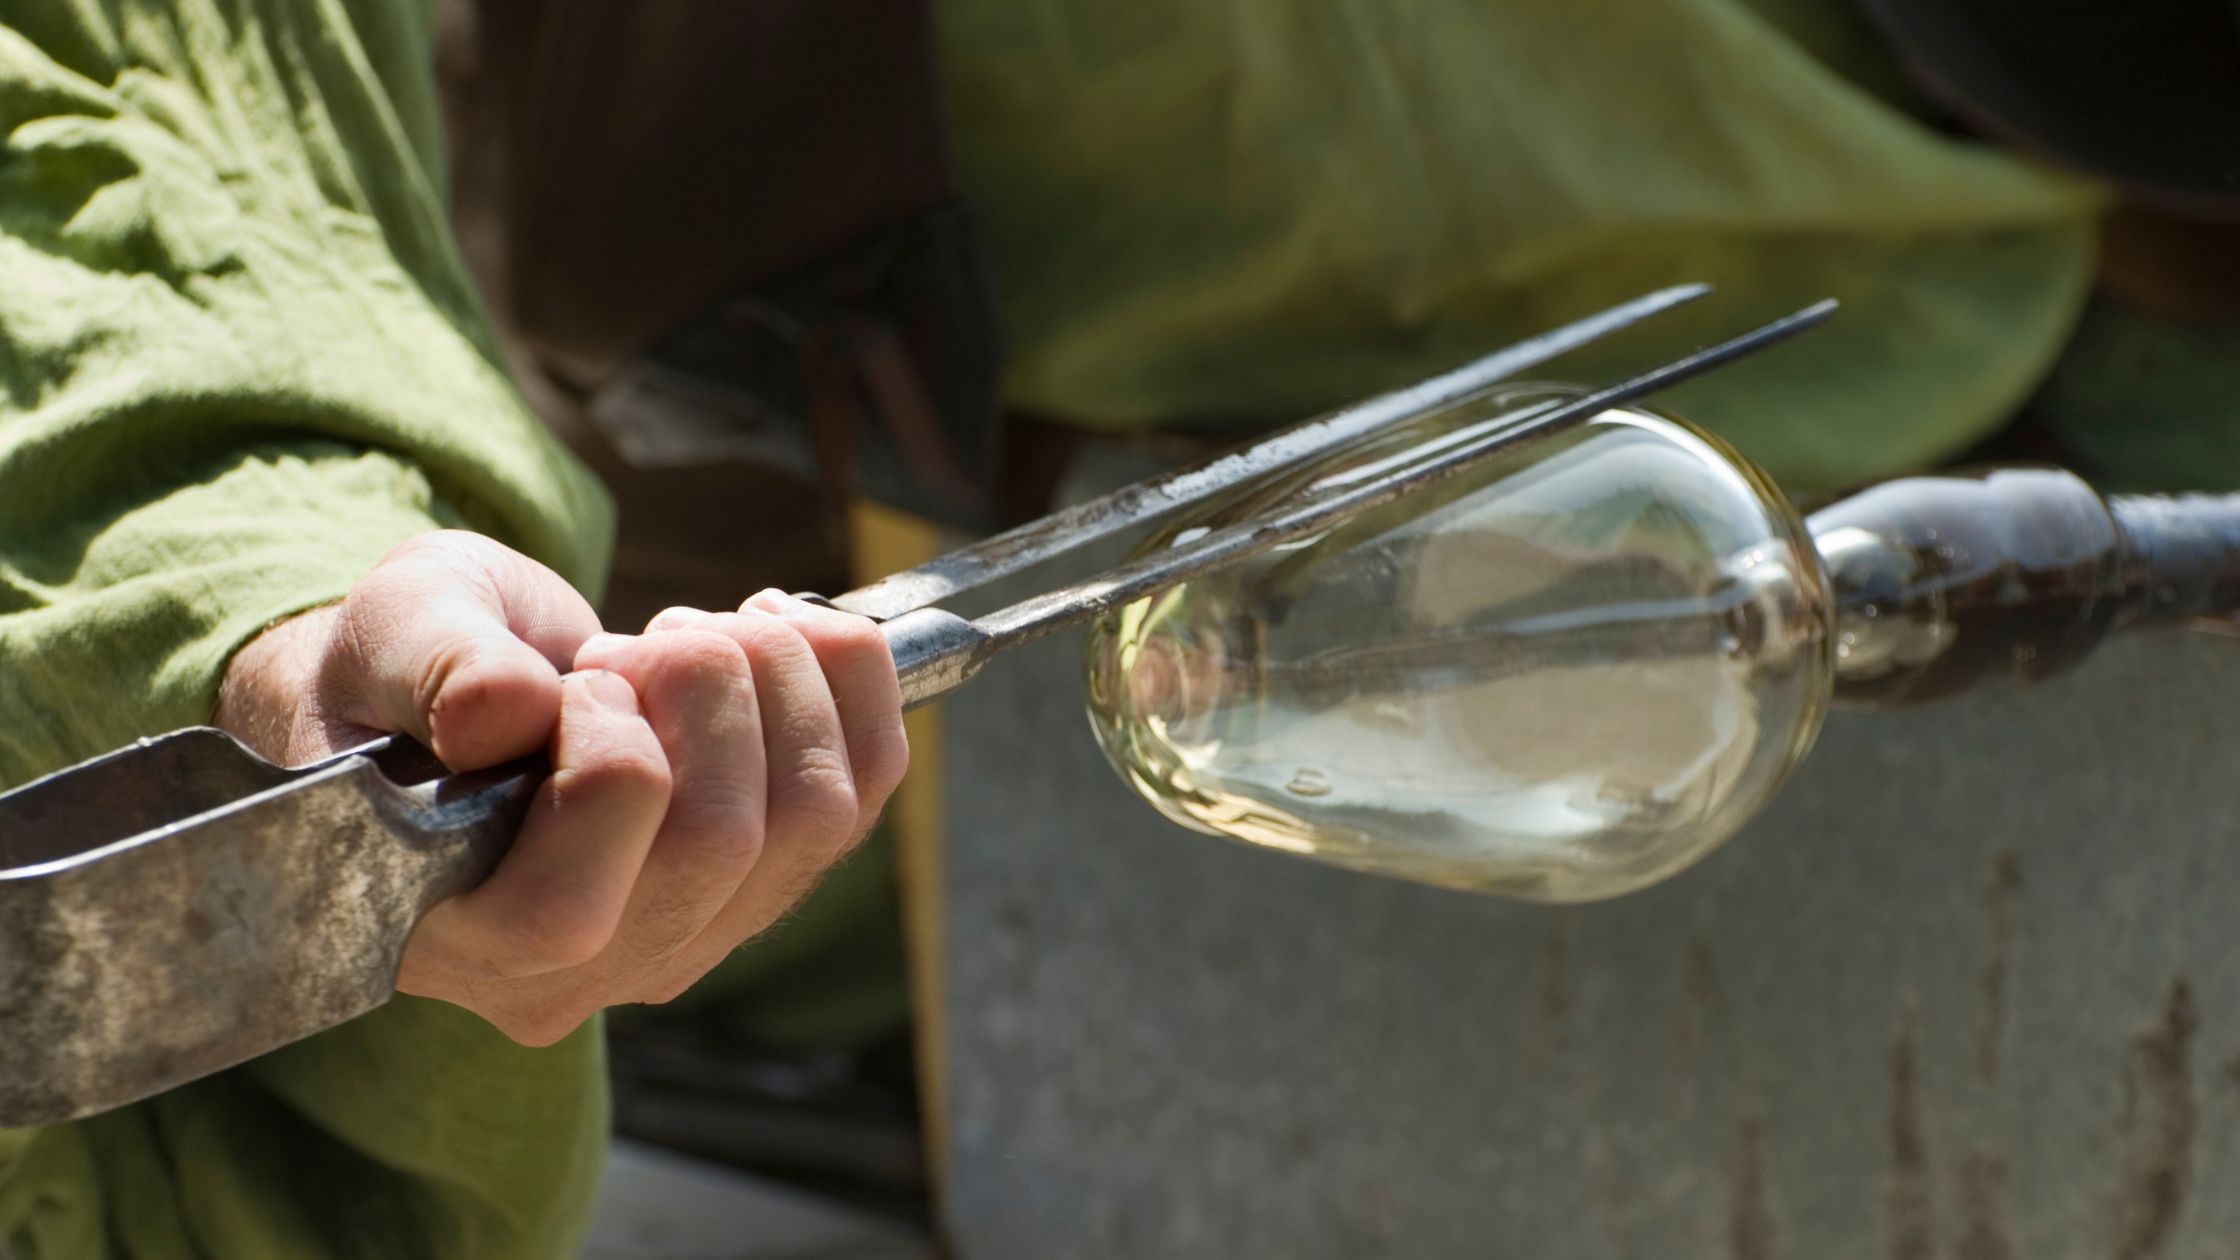 The History Of Glassmaking Street Science